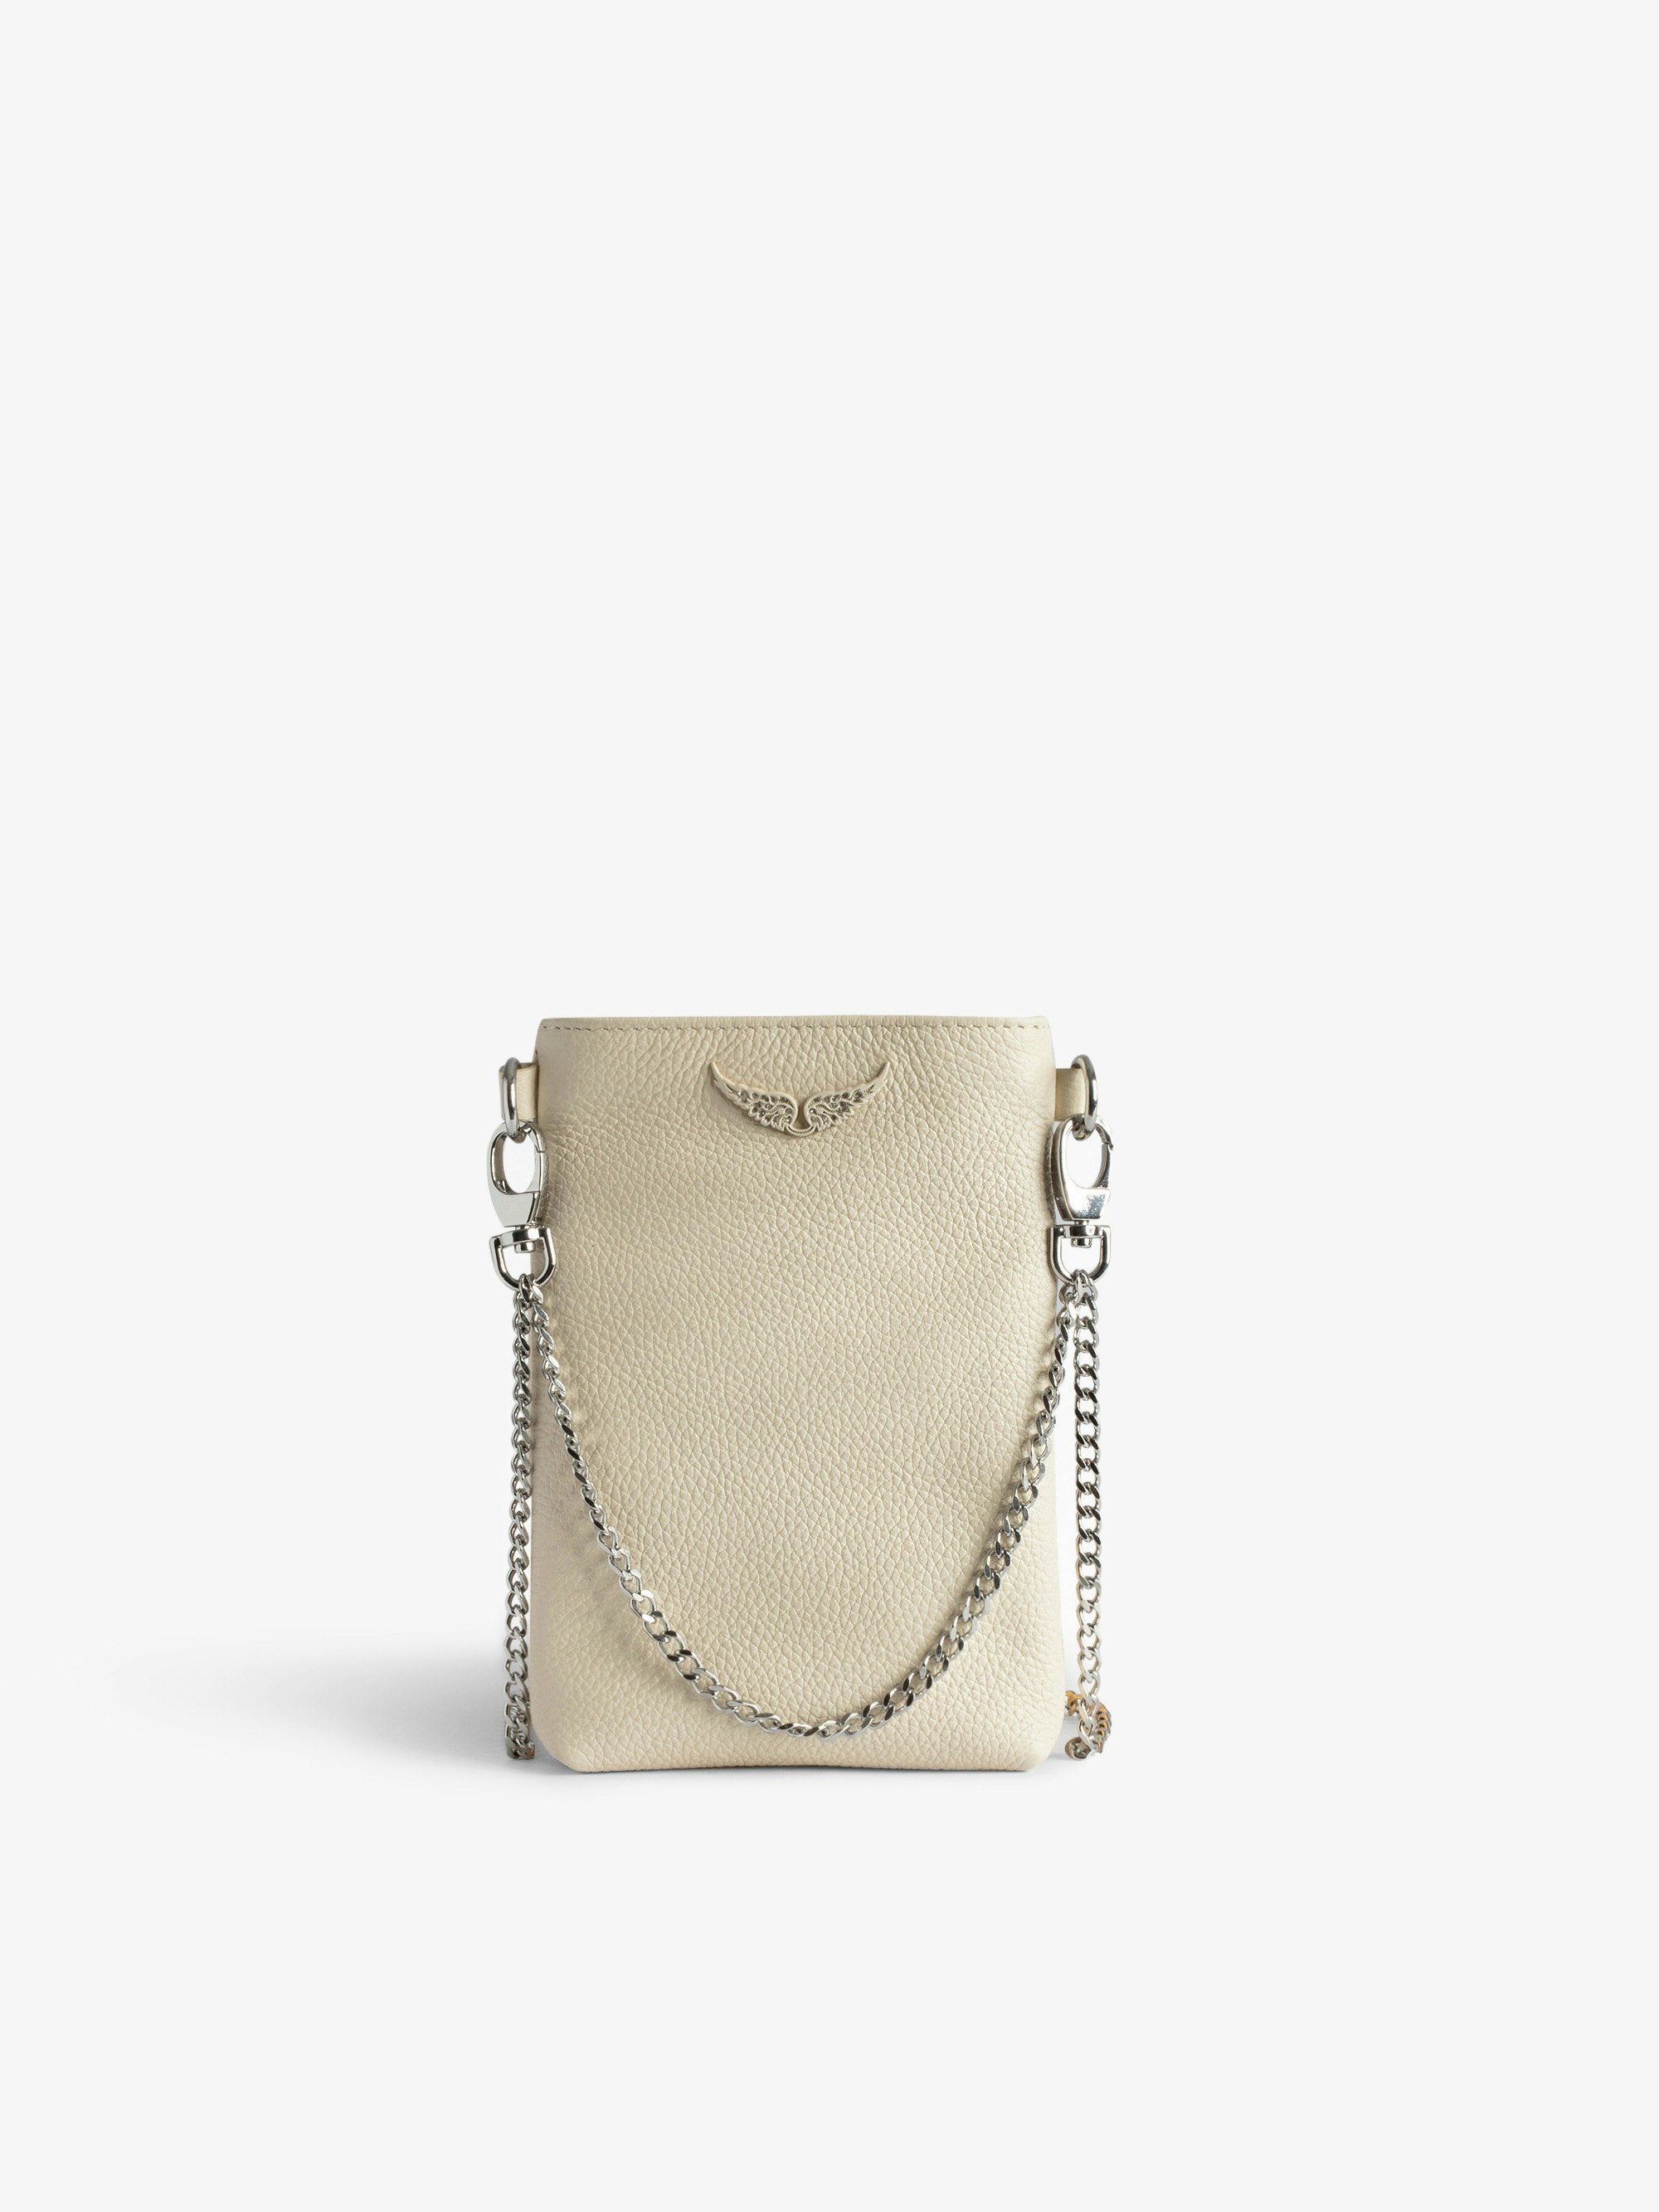 Rock Pouch Clutch - Women’s ecru grained leather phone pouch with chains and diamanté wings charm.